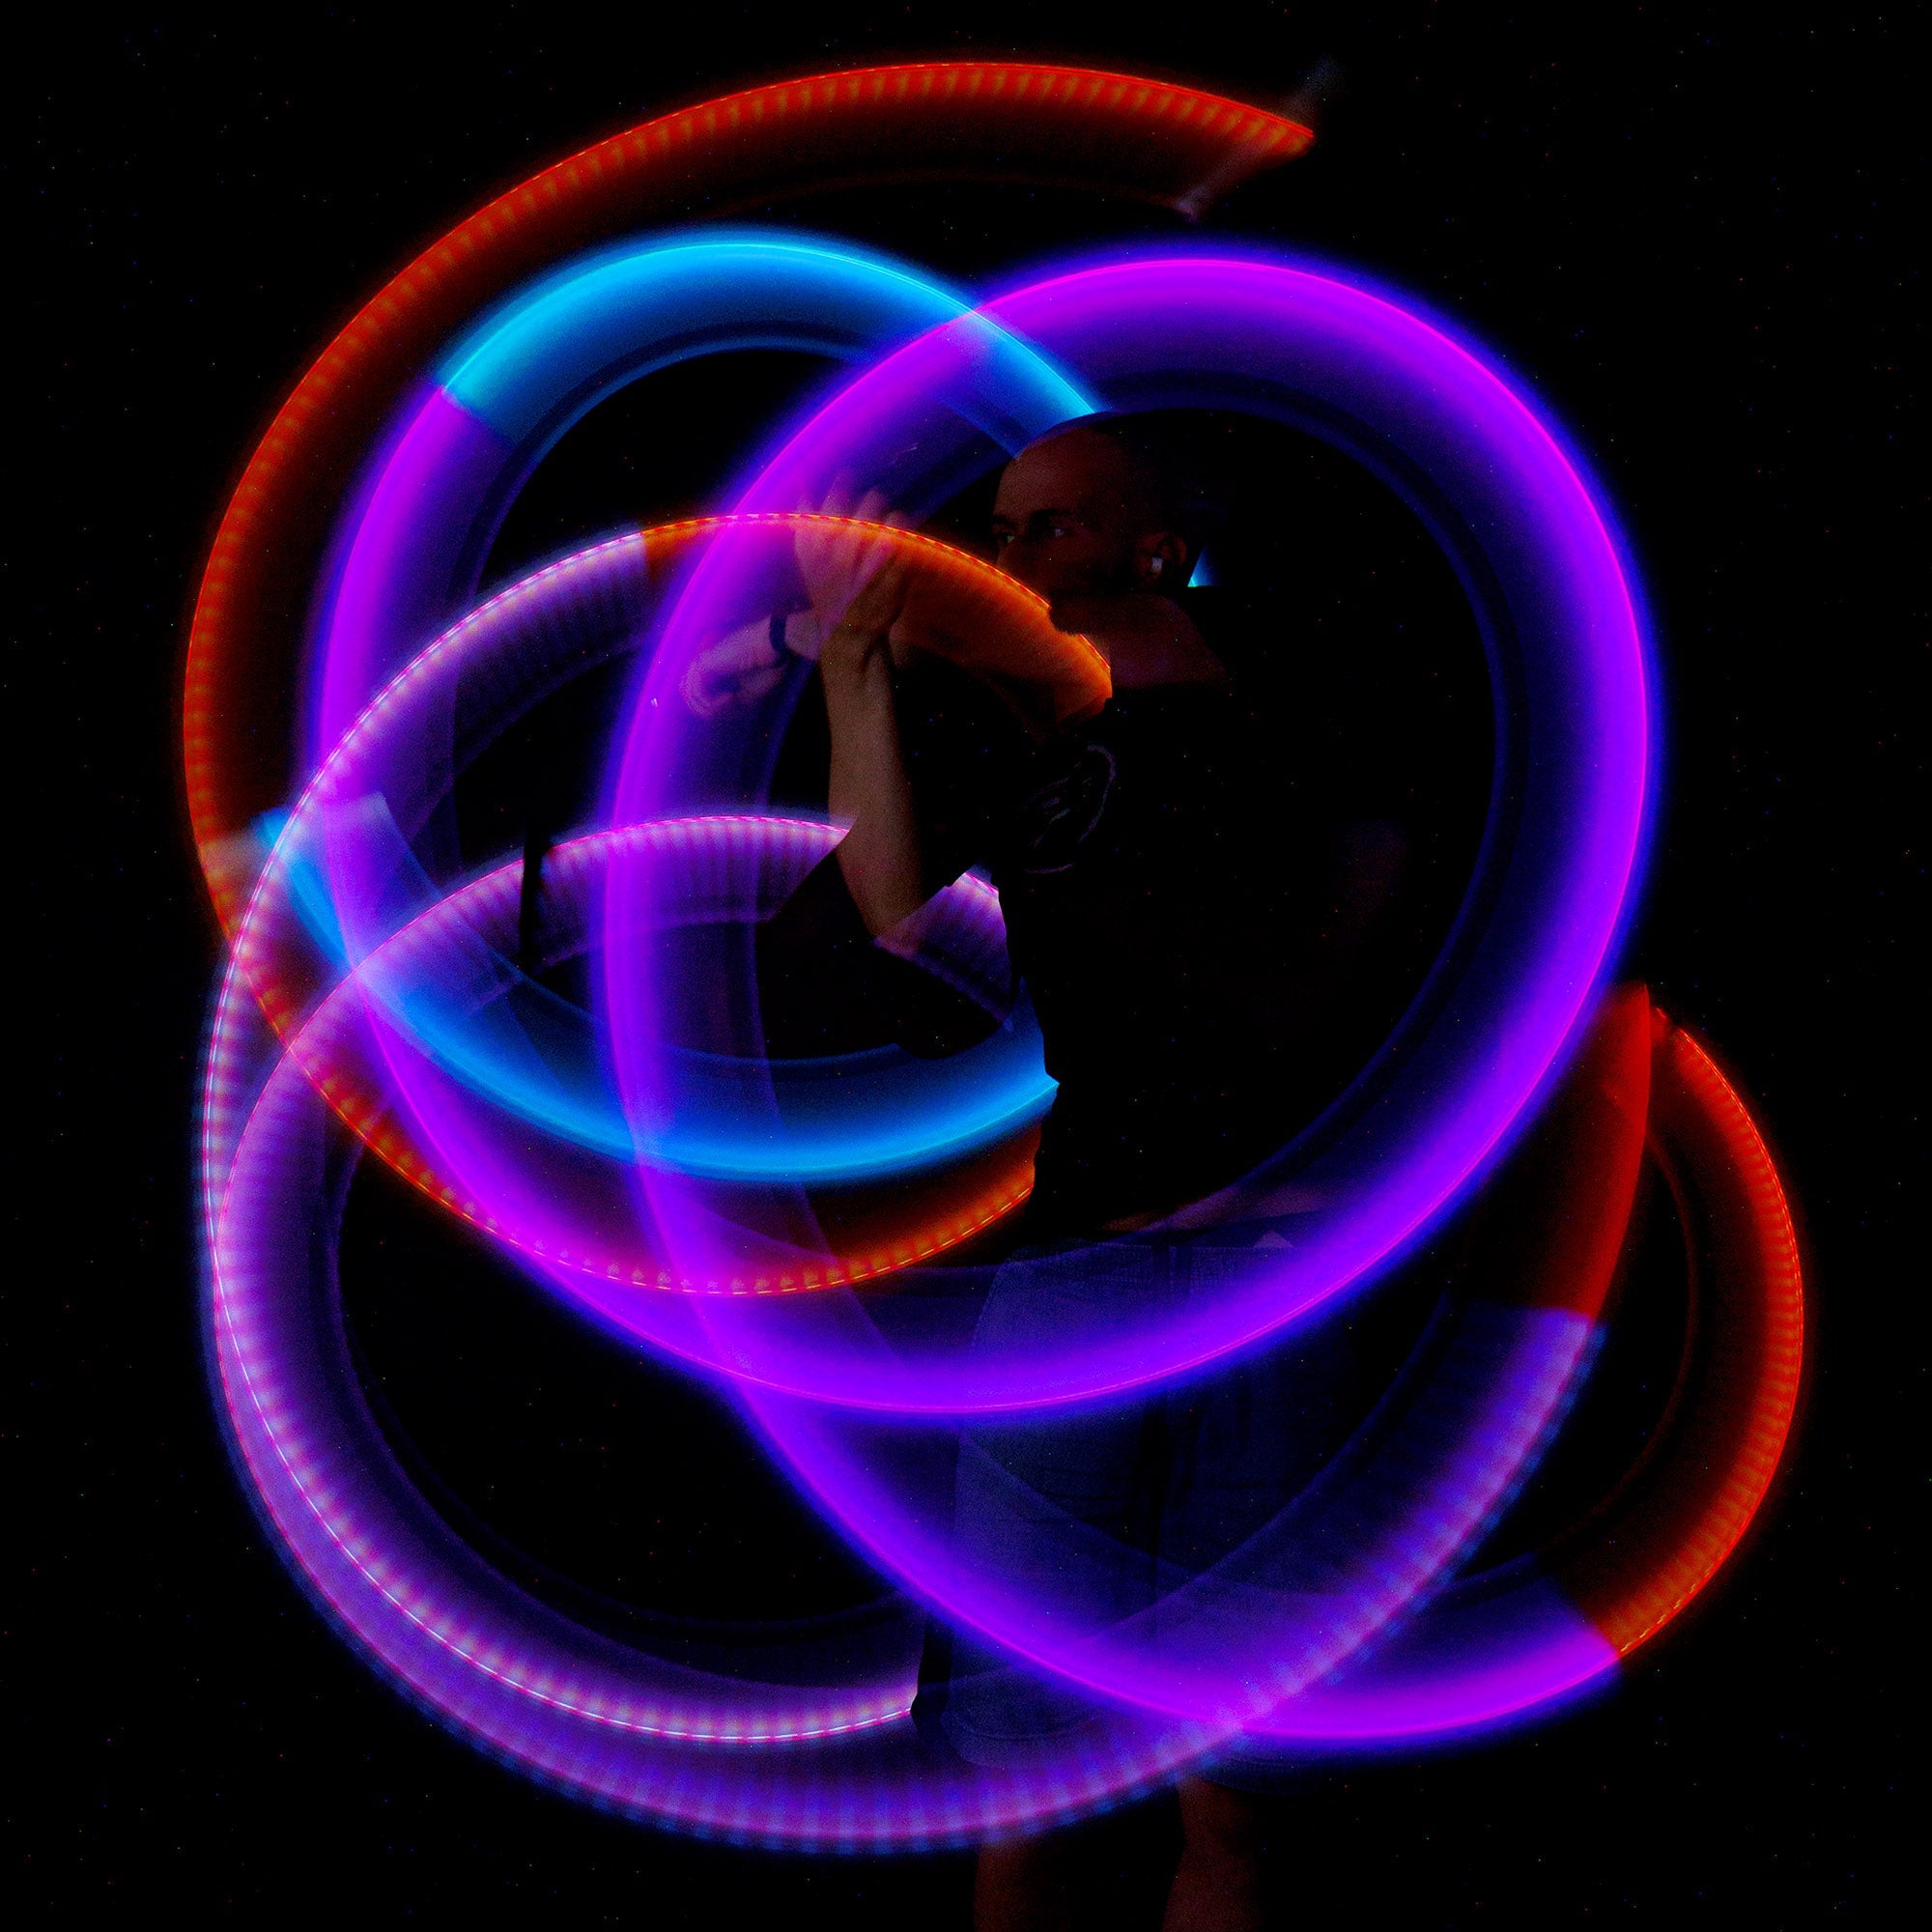 stick poi spinning with light trails